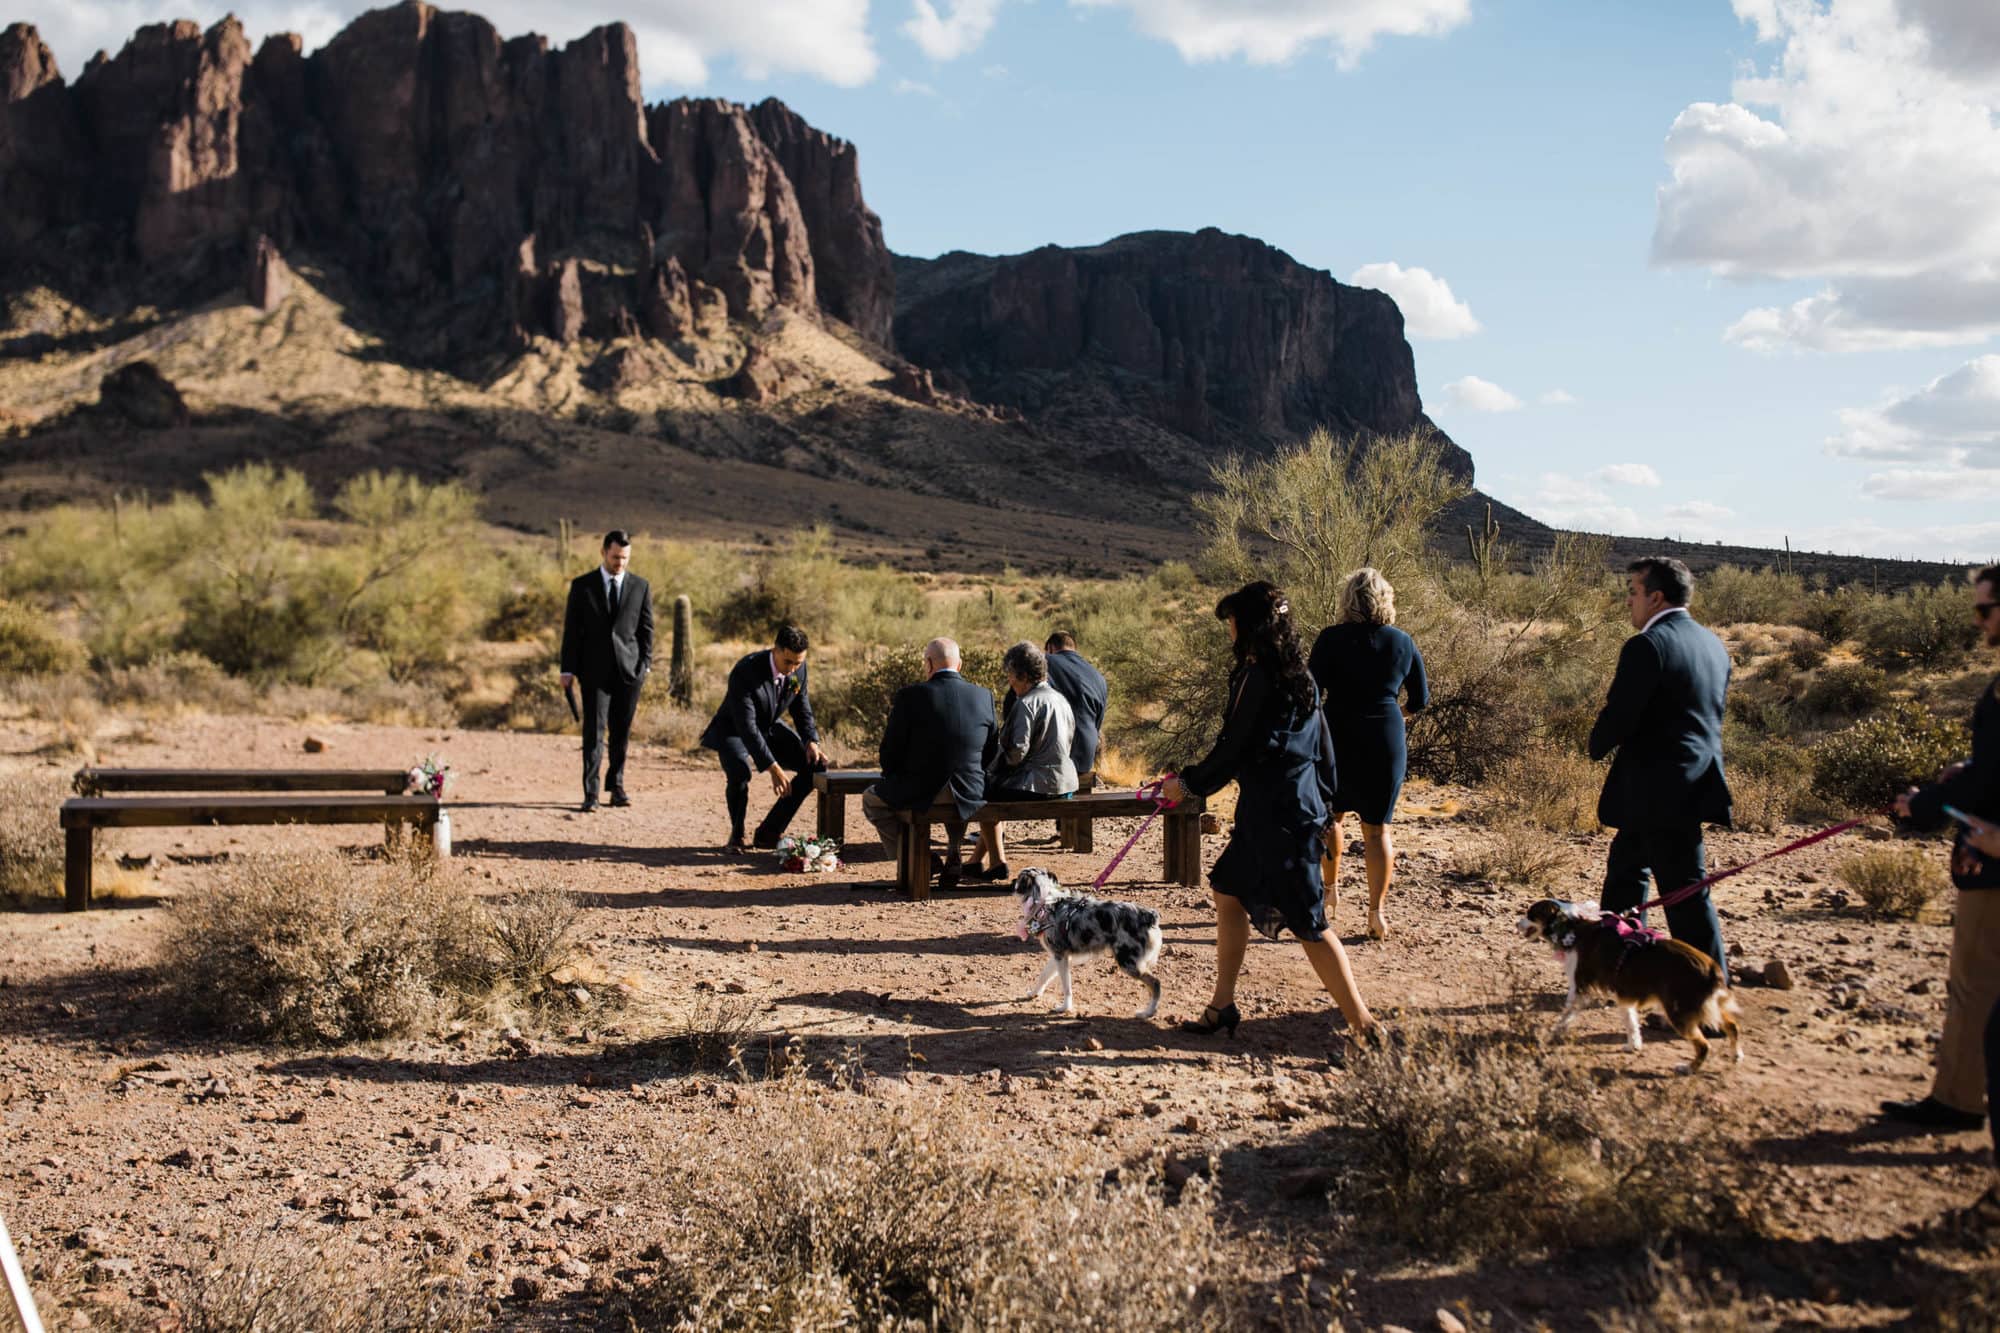 This Lost Dutchman State Park Wedding showcases exactly the desert is the best. A day full of family, love, and a stunning sunset- it's not to be missed.